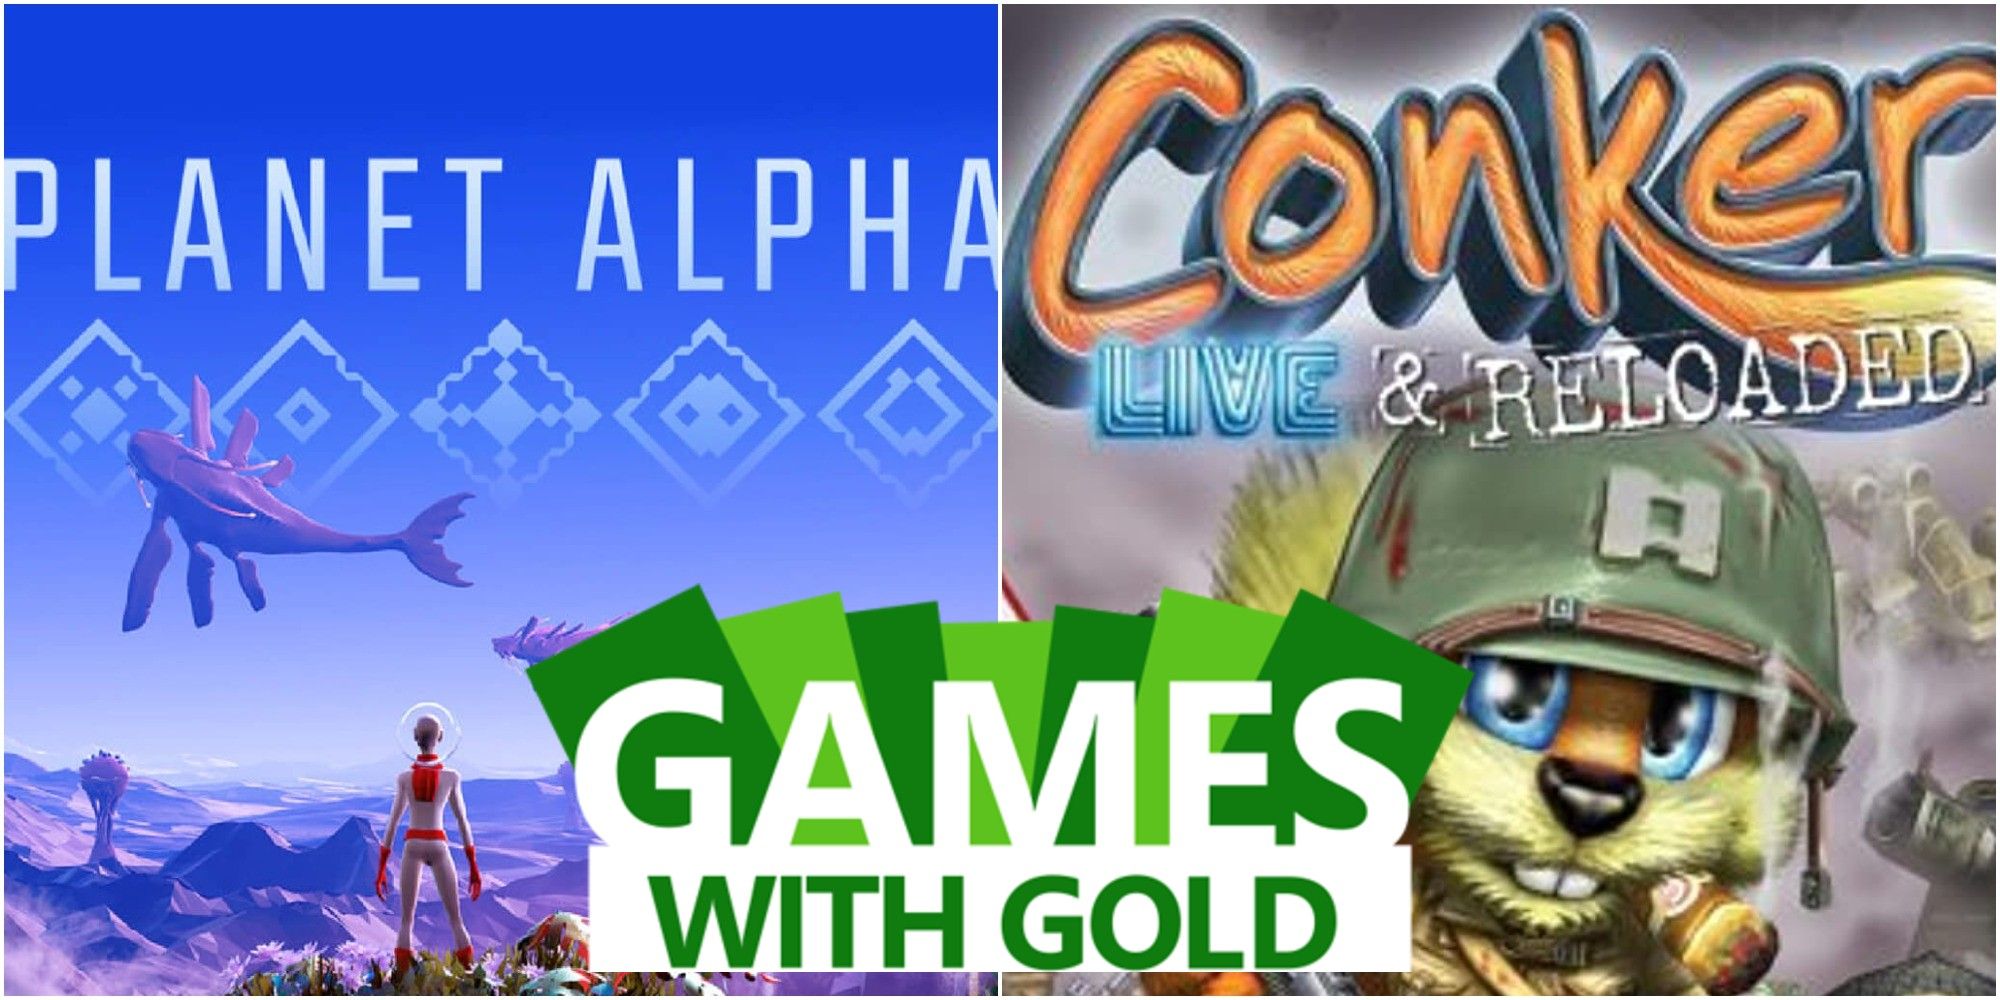 planet alpha conker games with gold